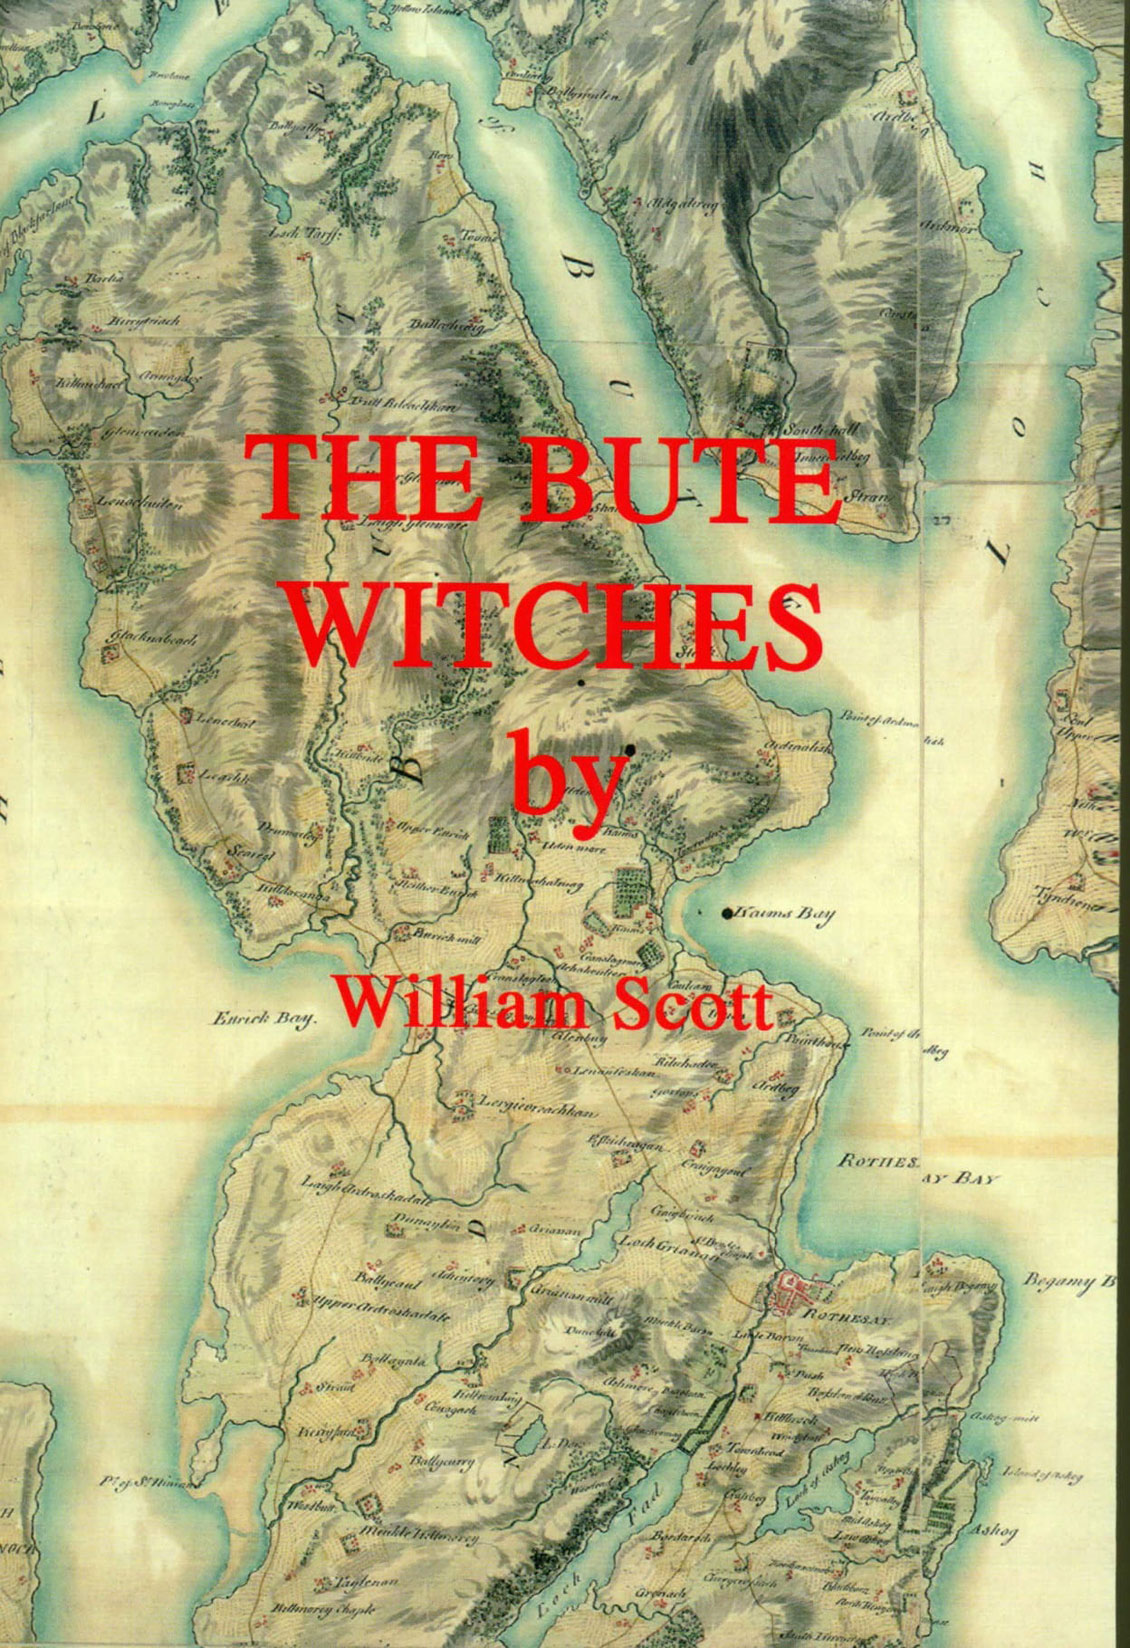 © Elenkus: Bute Witches book front cover